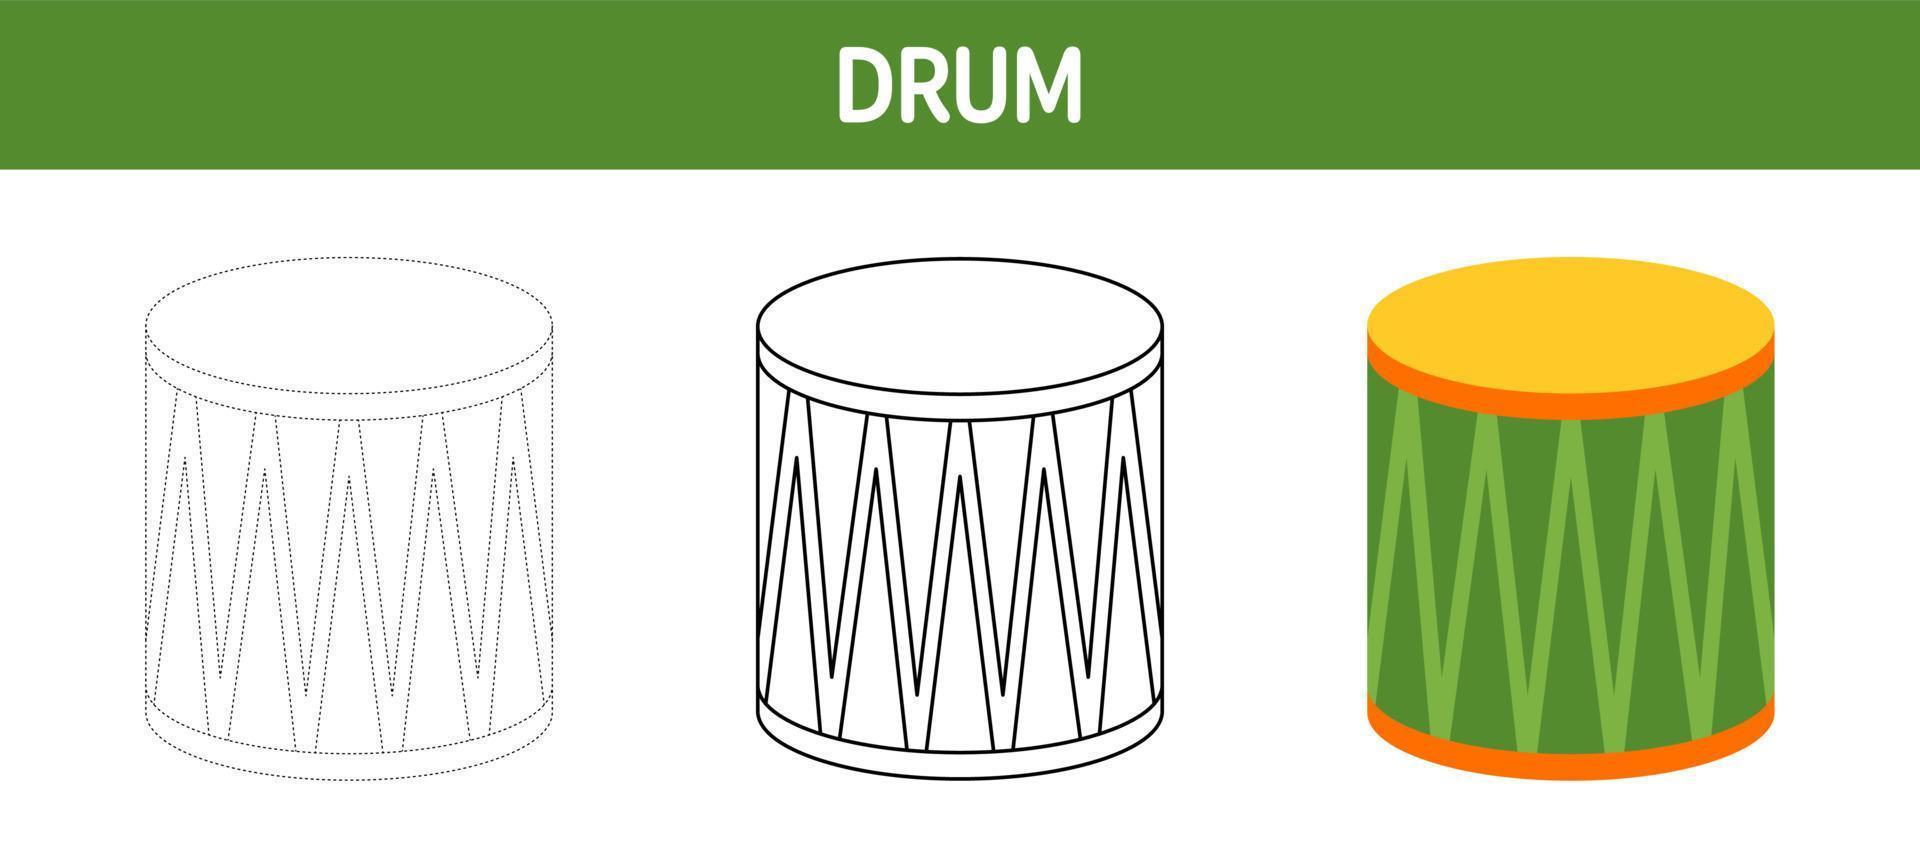 Drum tracing and coloring worksheet for kids vector